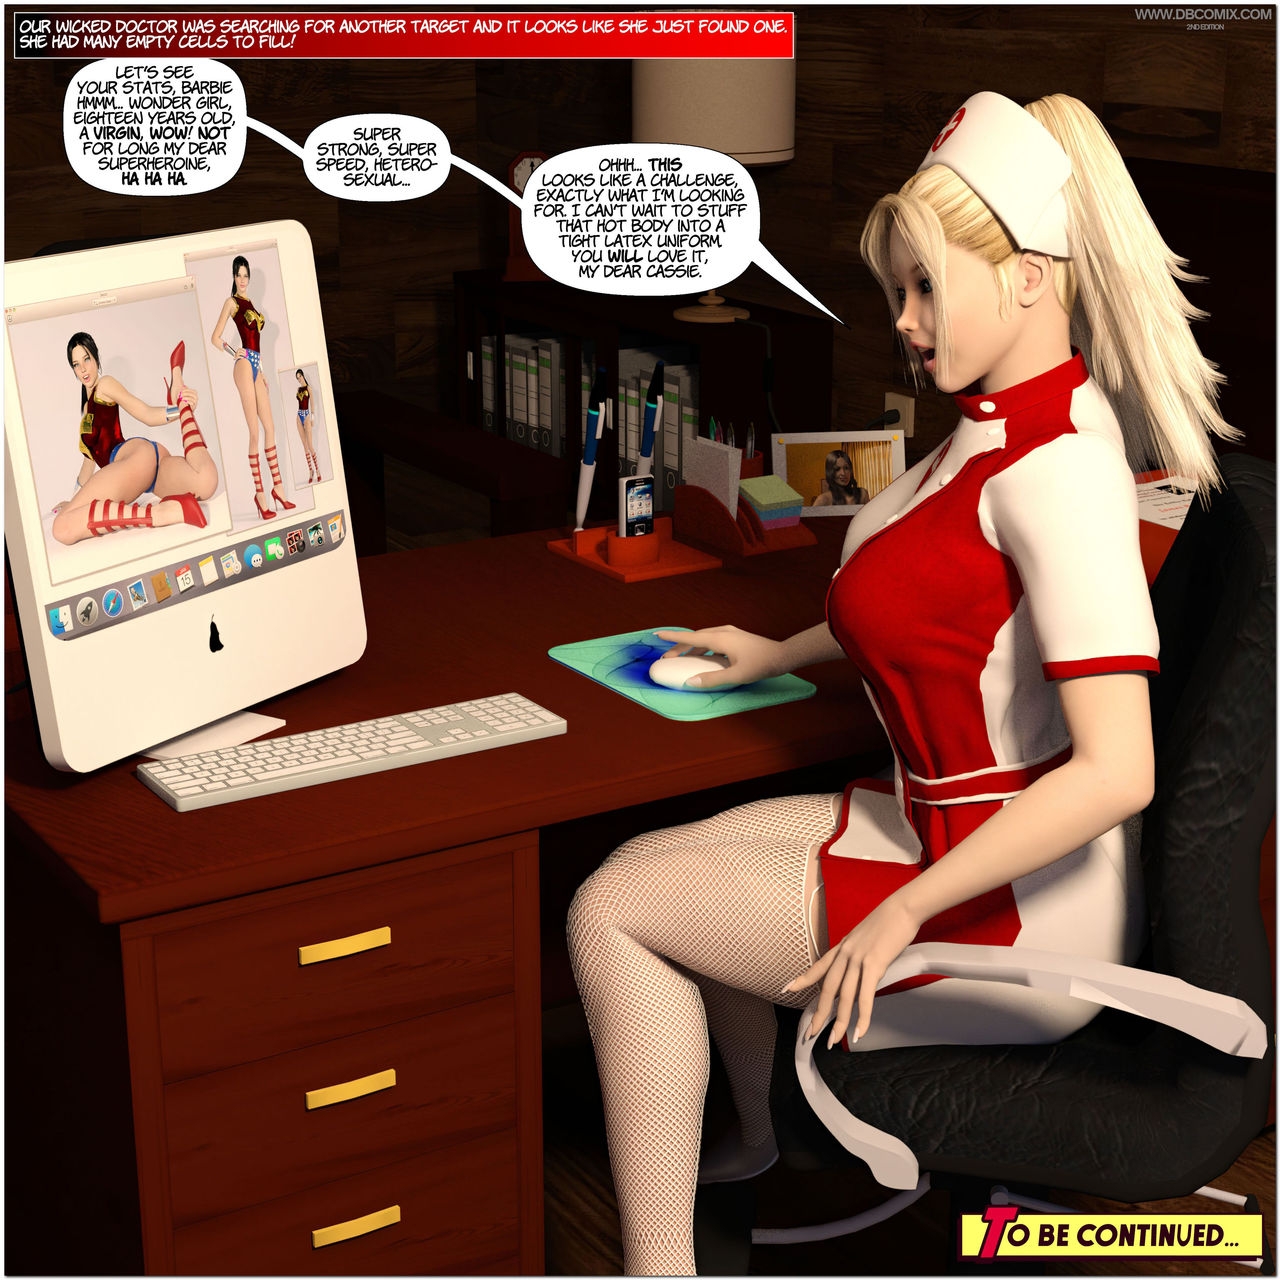 [DBComix] New Arkham For Superheroines 1 2nd Edition - Humiliation and Degradation of Power Girl 78